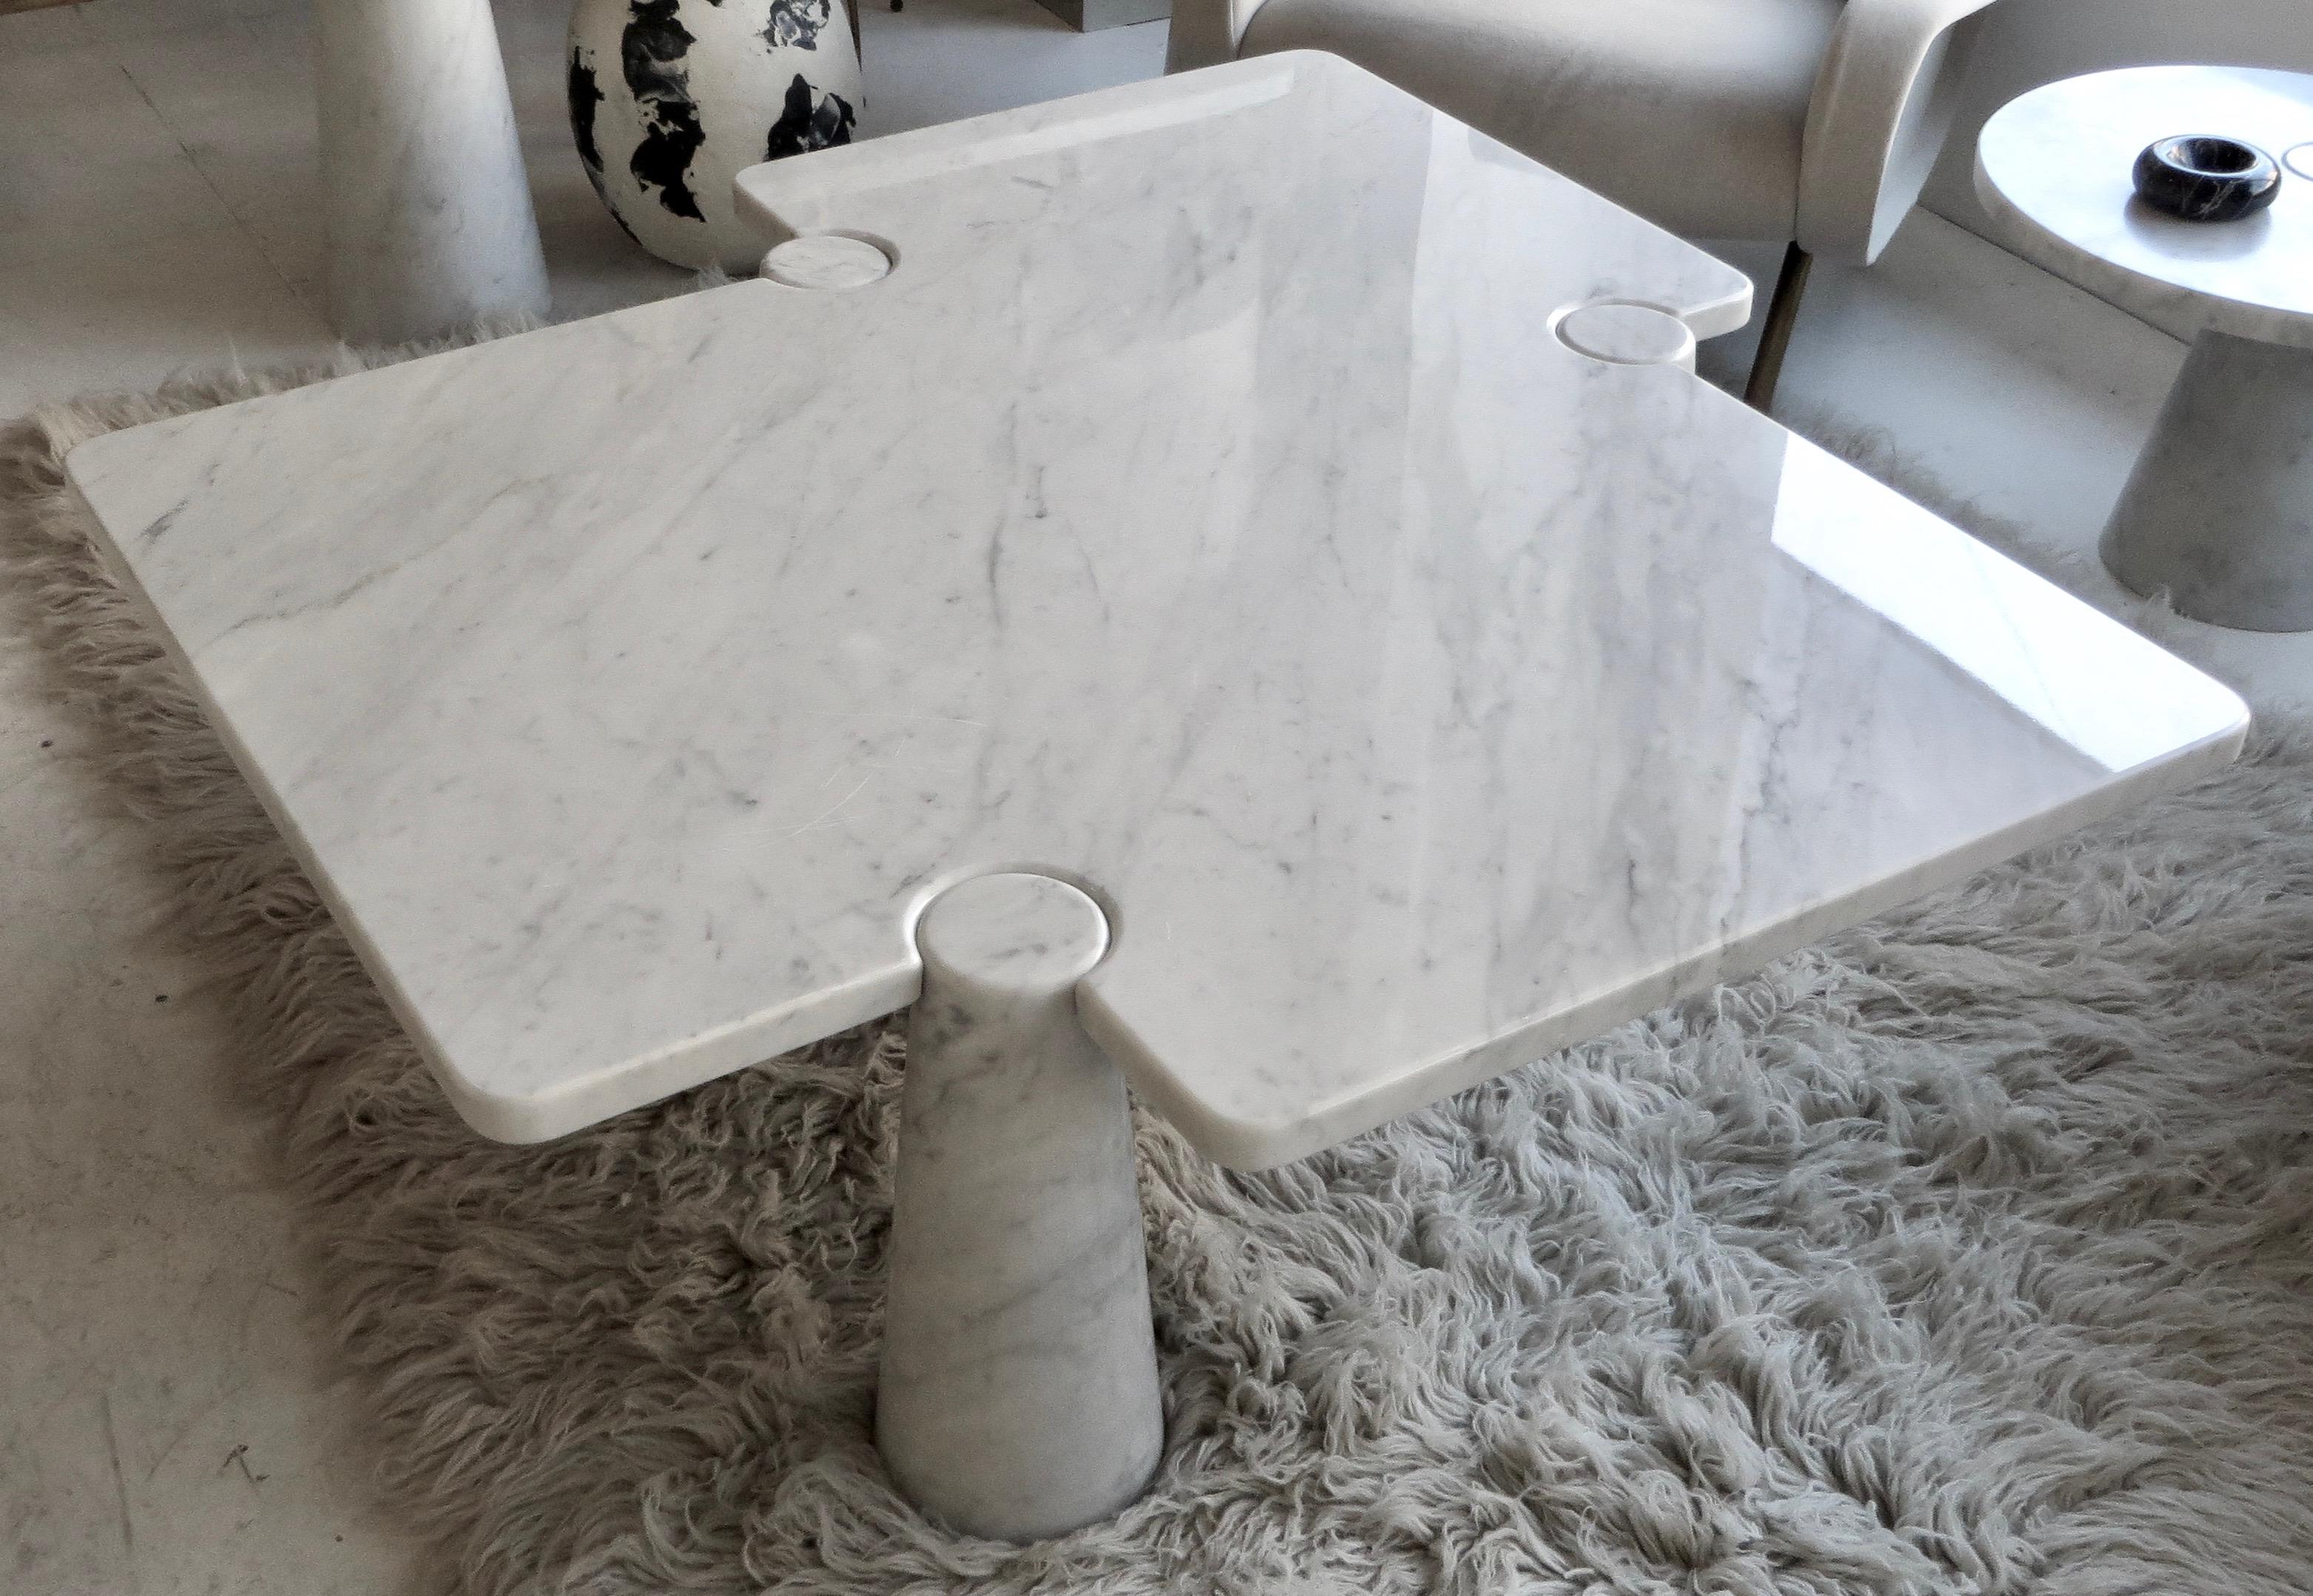 Angelo Mangiarotti manufactured by Skipper, circa 1970. Model 'Freccia' from the Eros Collection, white Carrara marble. This is a rare table. The asymmetrical design is outstanding and unique to Angelo Mangiarotti use of architecture in all his Eros